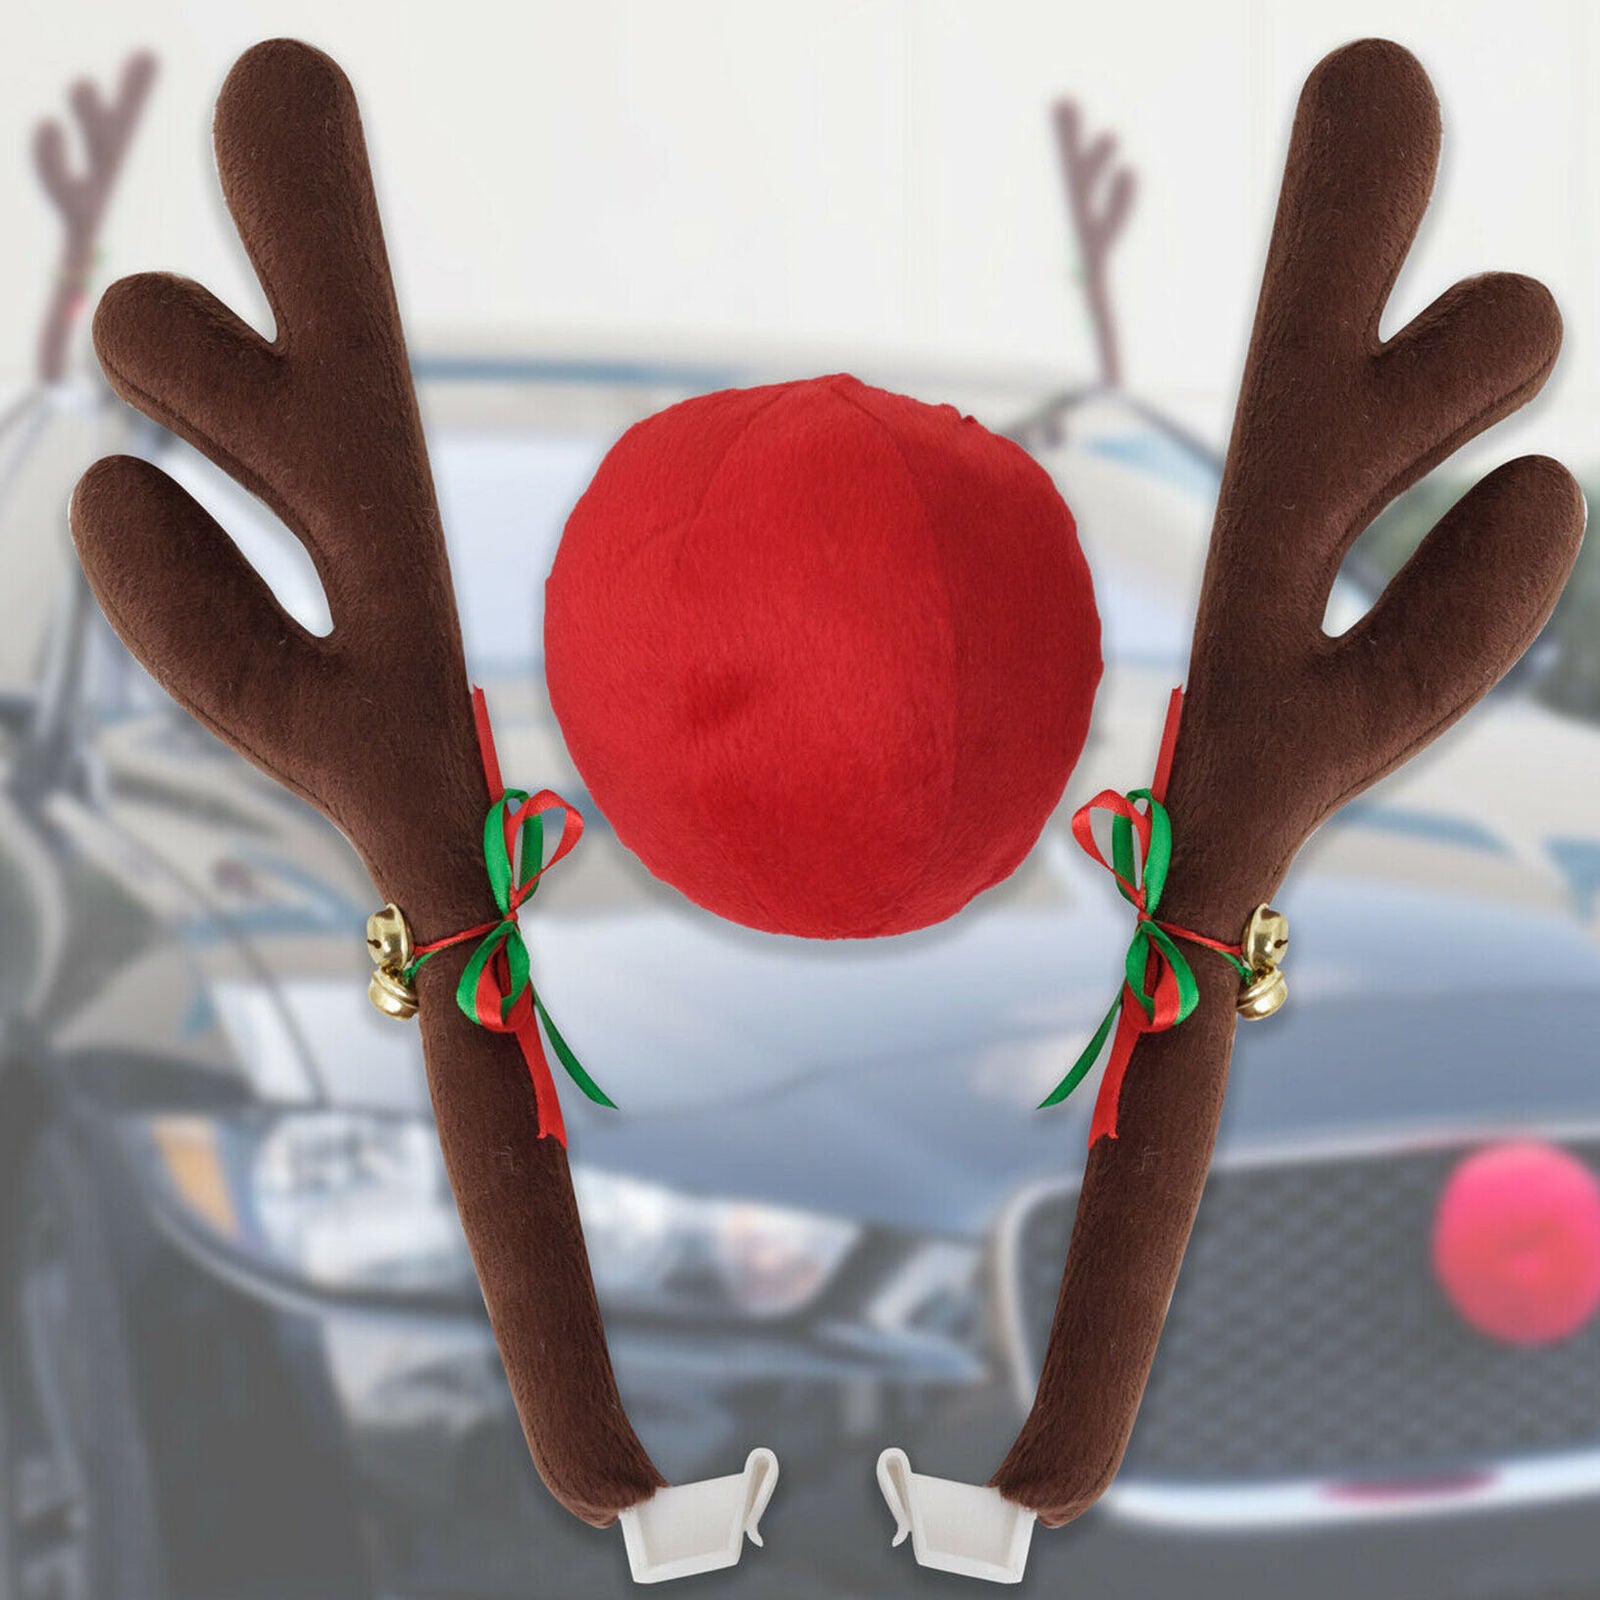 Reindeer Christmas Decoration For Car, Holiday Party Antlers And Nose Decor